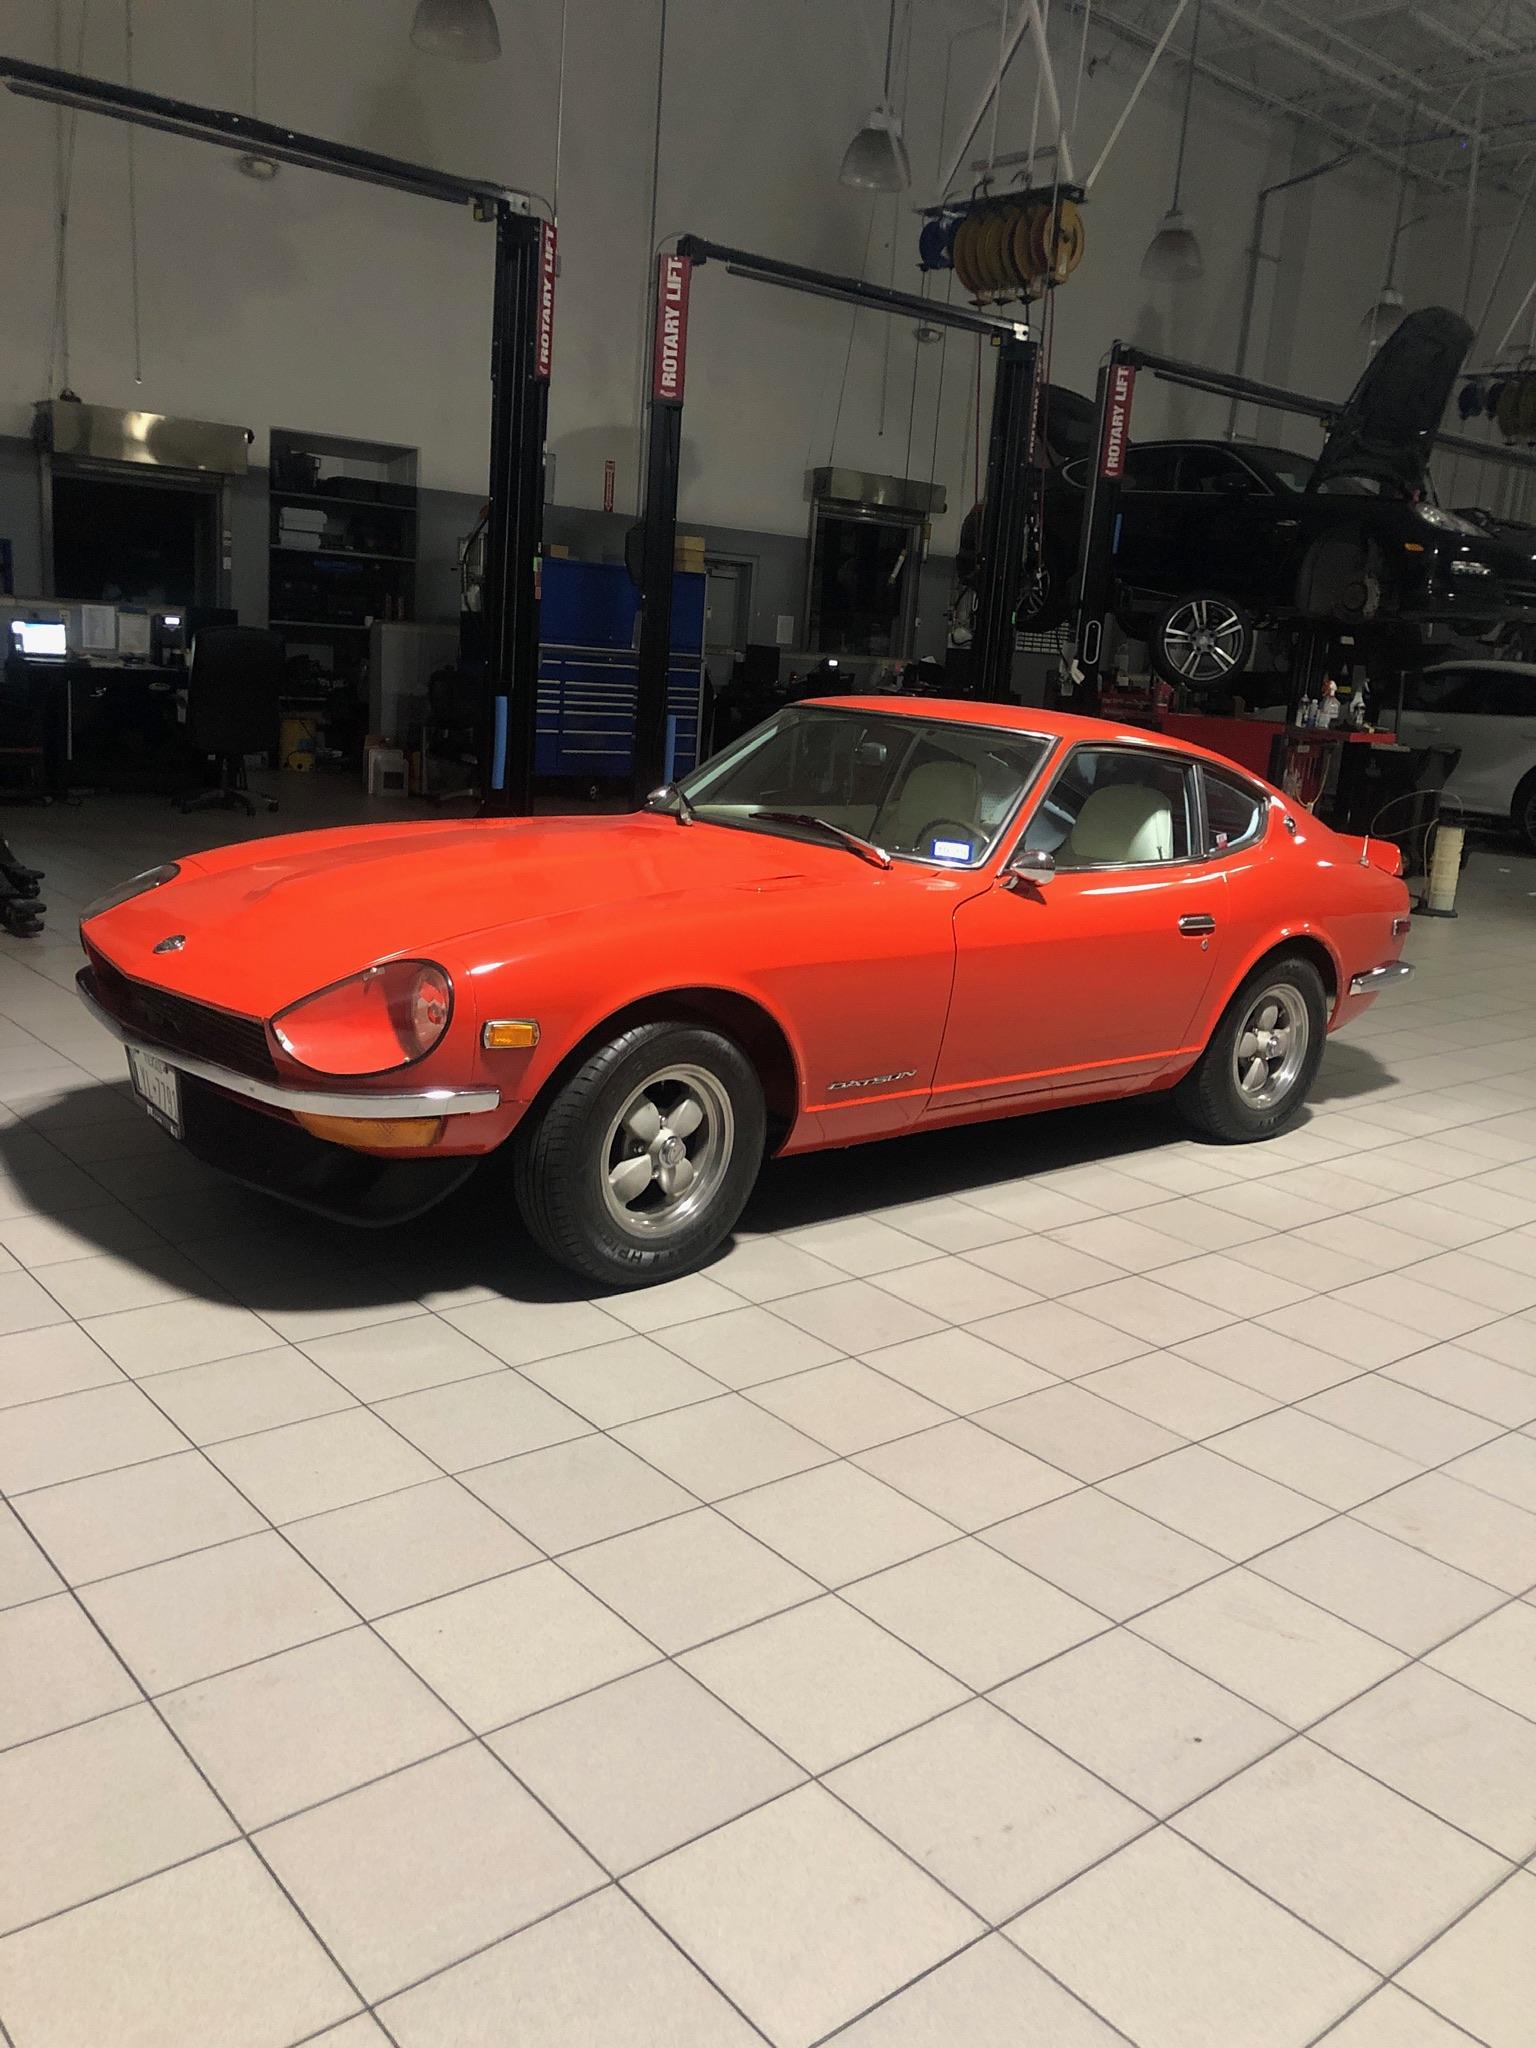 1972 240z - For sale at No Reserve at 12/7/19 Houston Auction